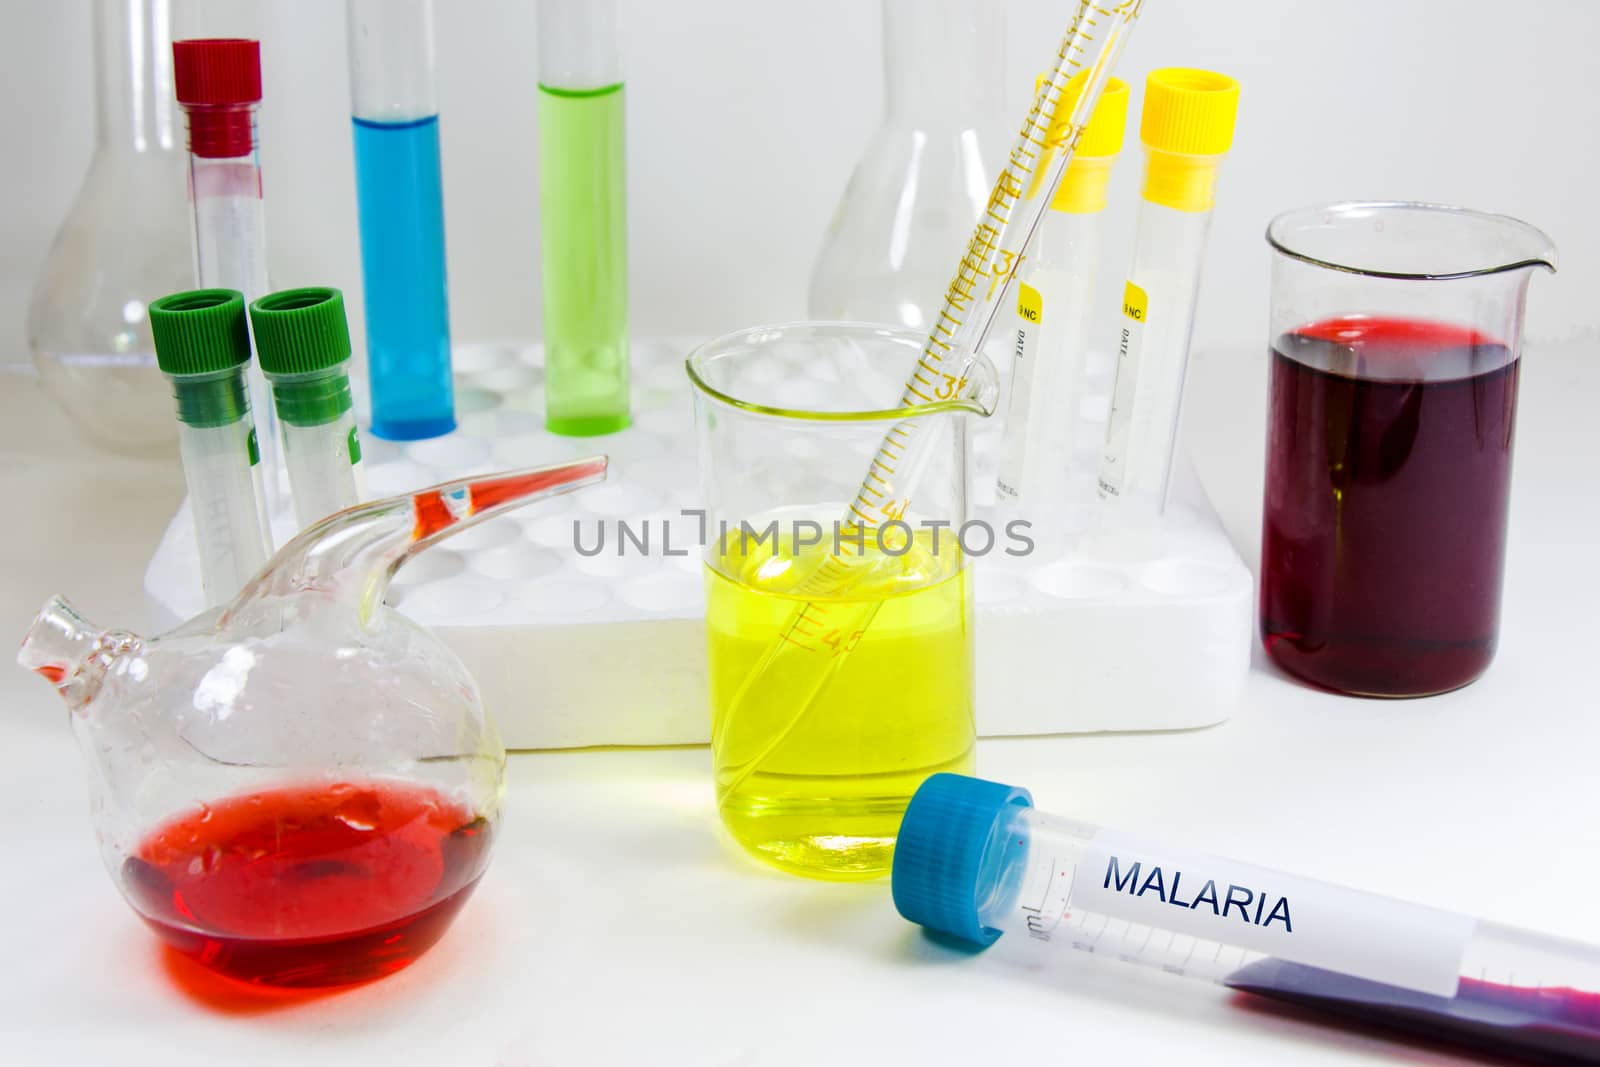 Malaria blood test tube samples, laboratory and diagnoses, chemical elements and instruments by Taidundua